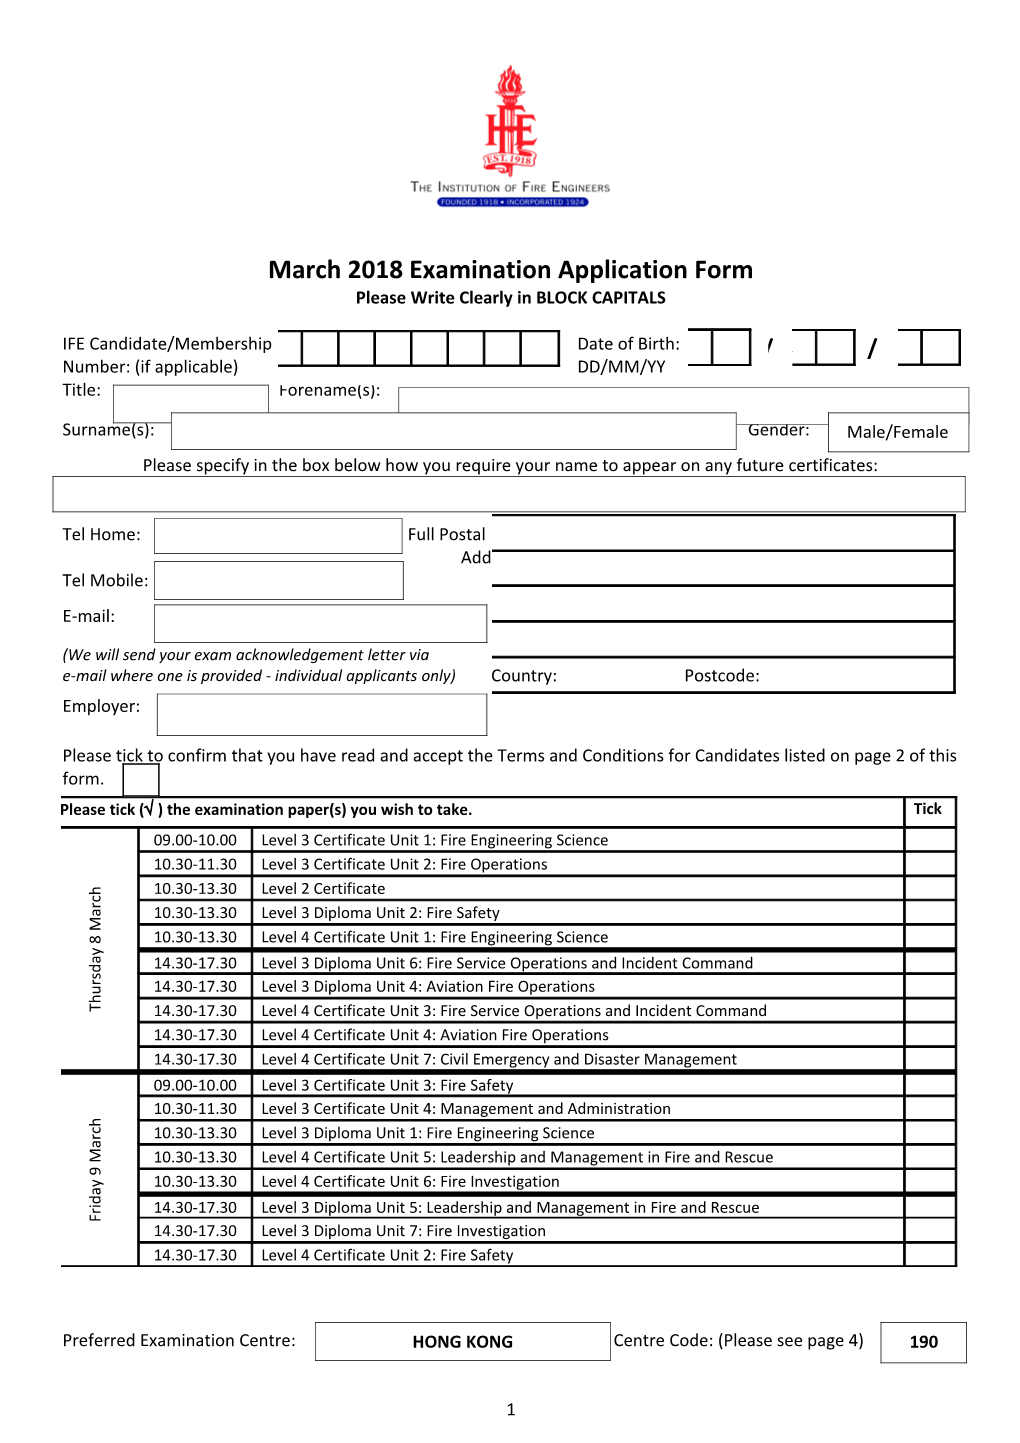 March 2018 Examination Application Form s1